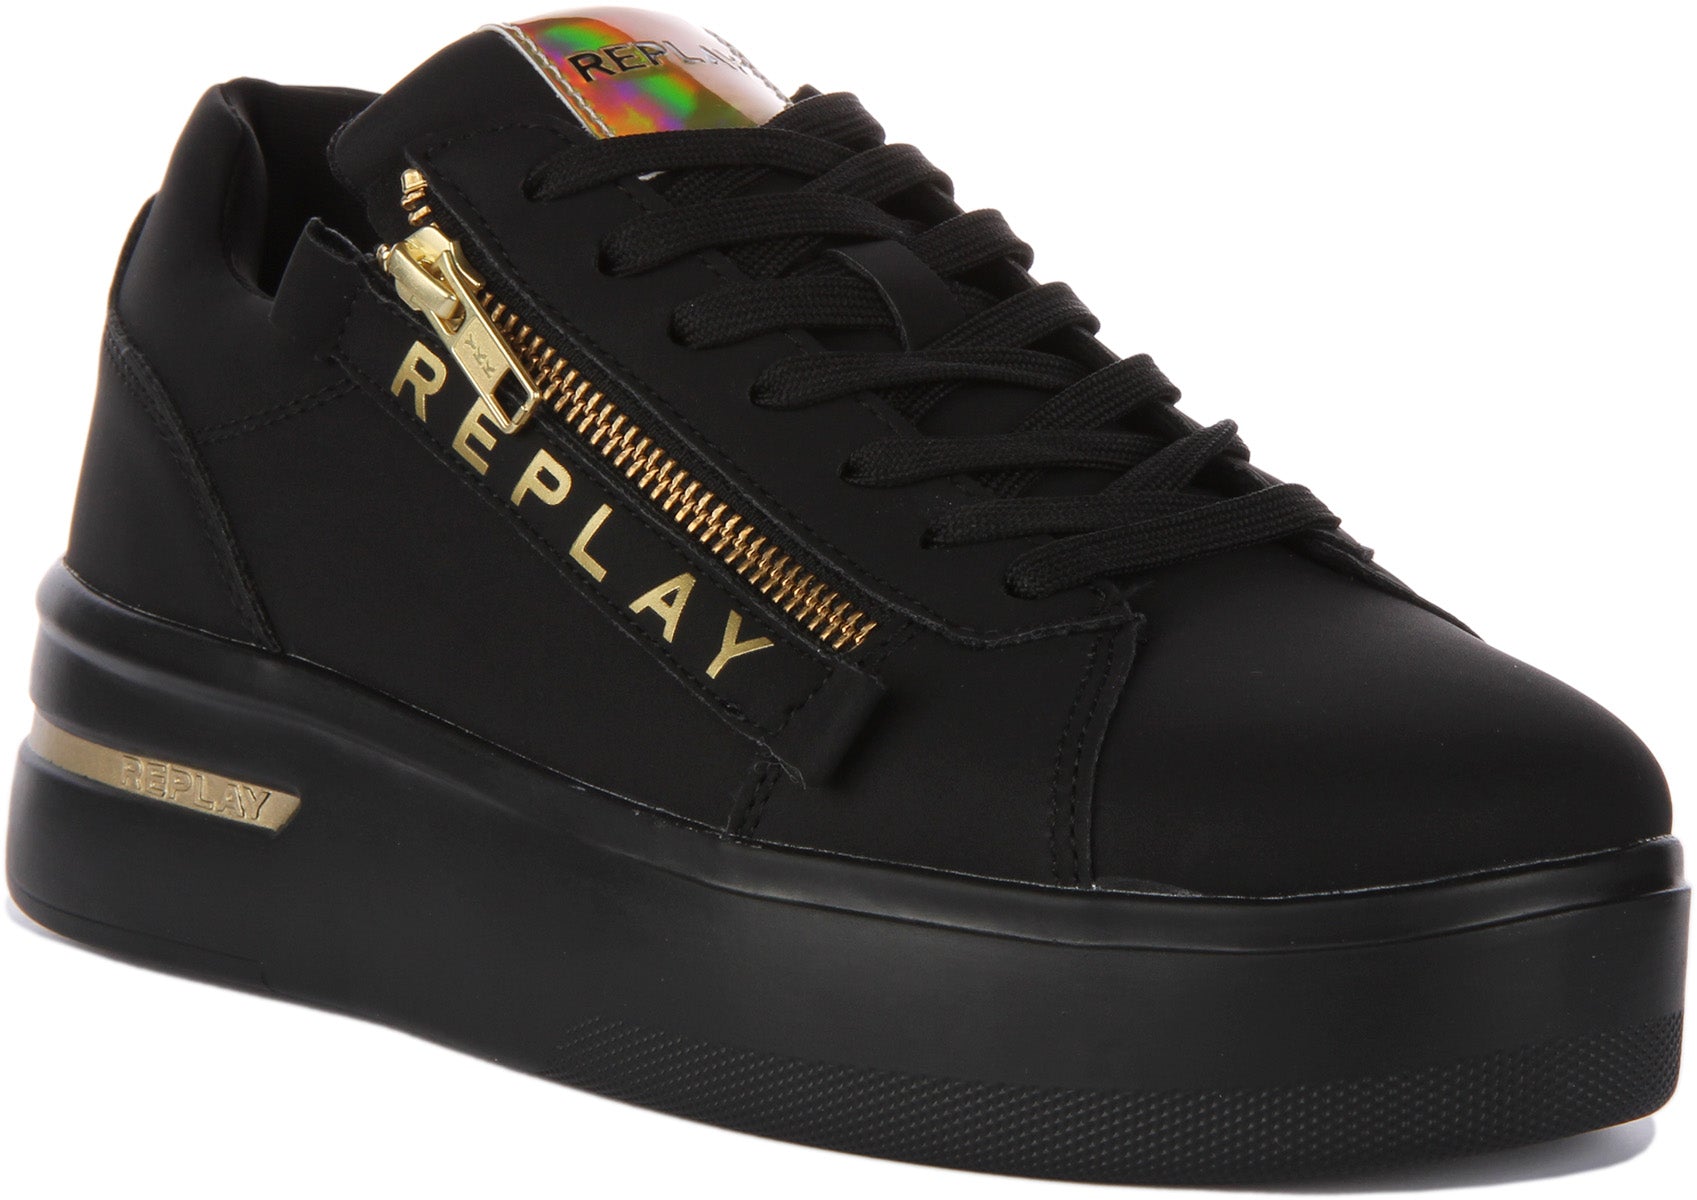 Low trainers Replay Black size 41 EU in Other - 18312918